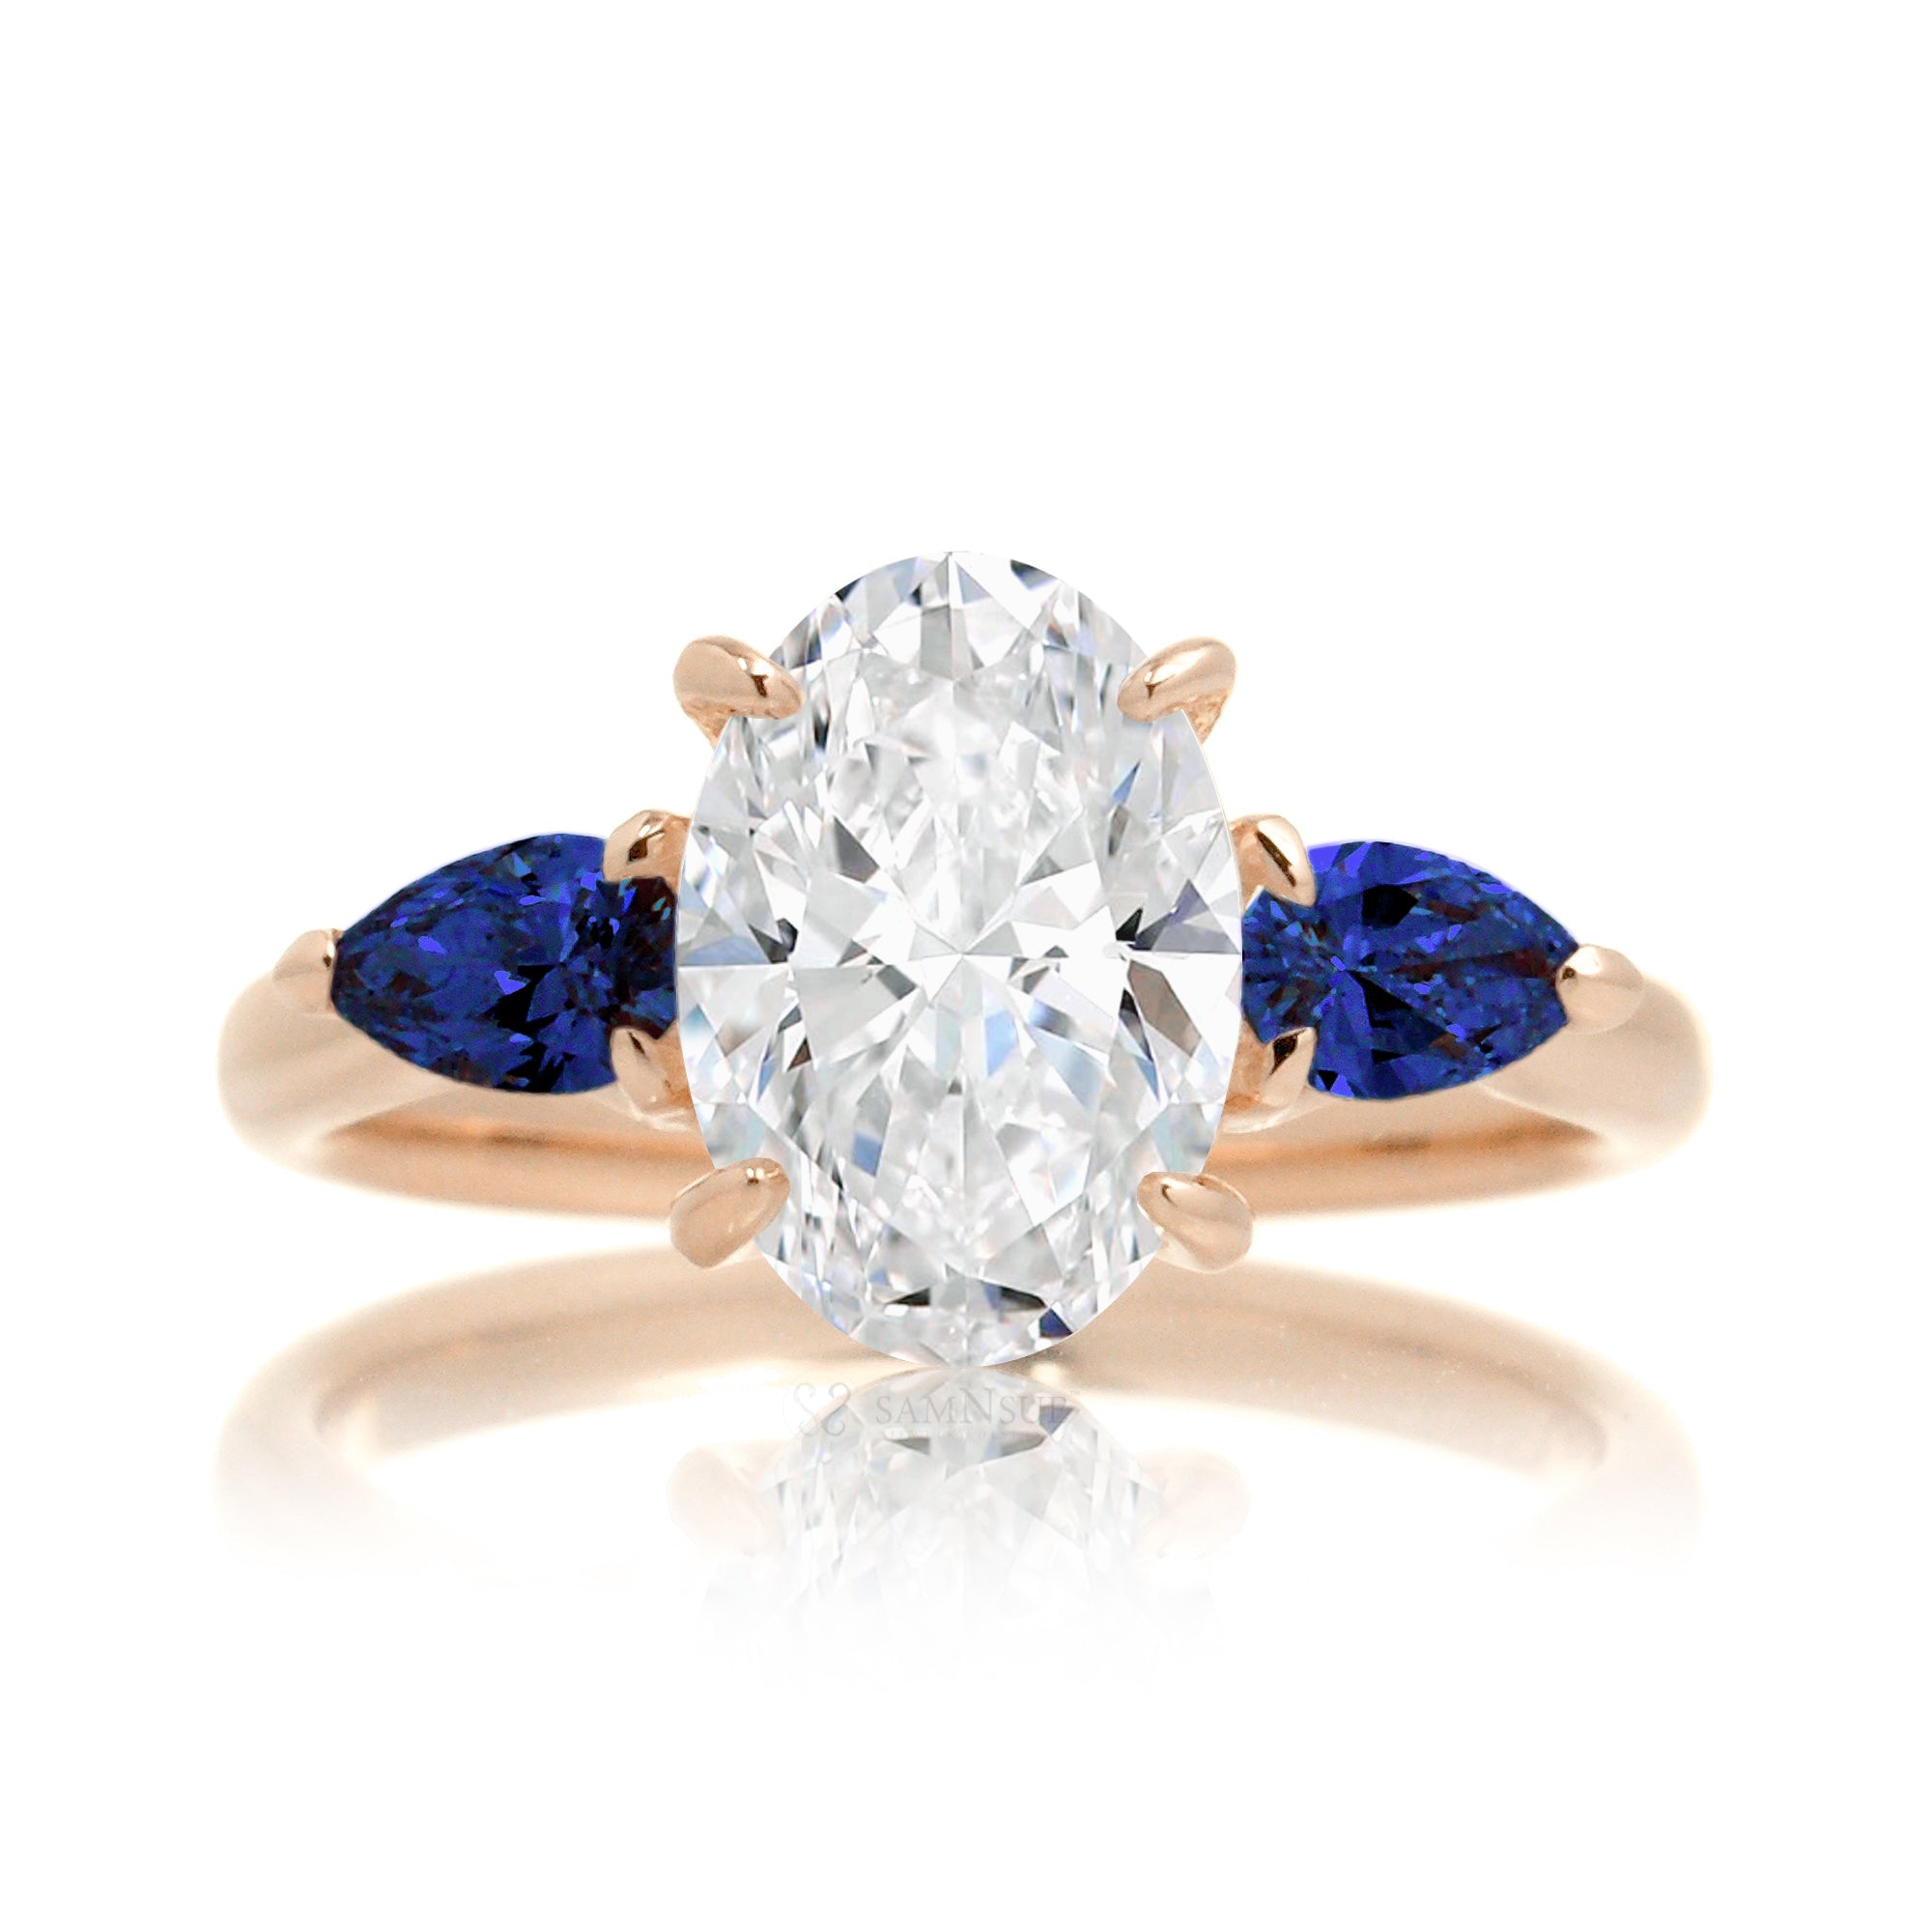 Three-stone pear sapphire and oval cut diamond engagement ring rose gold